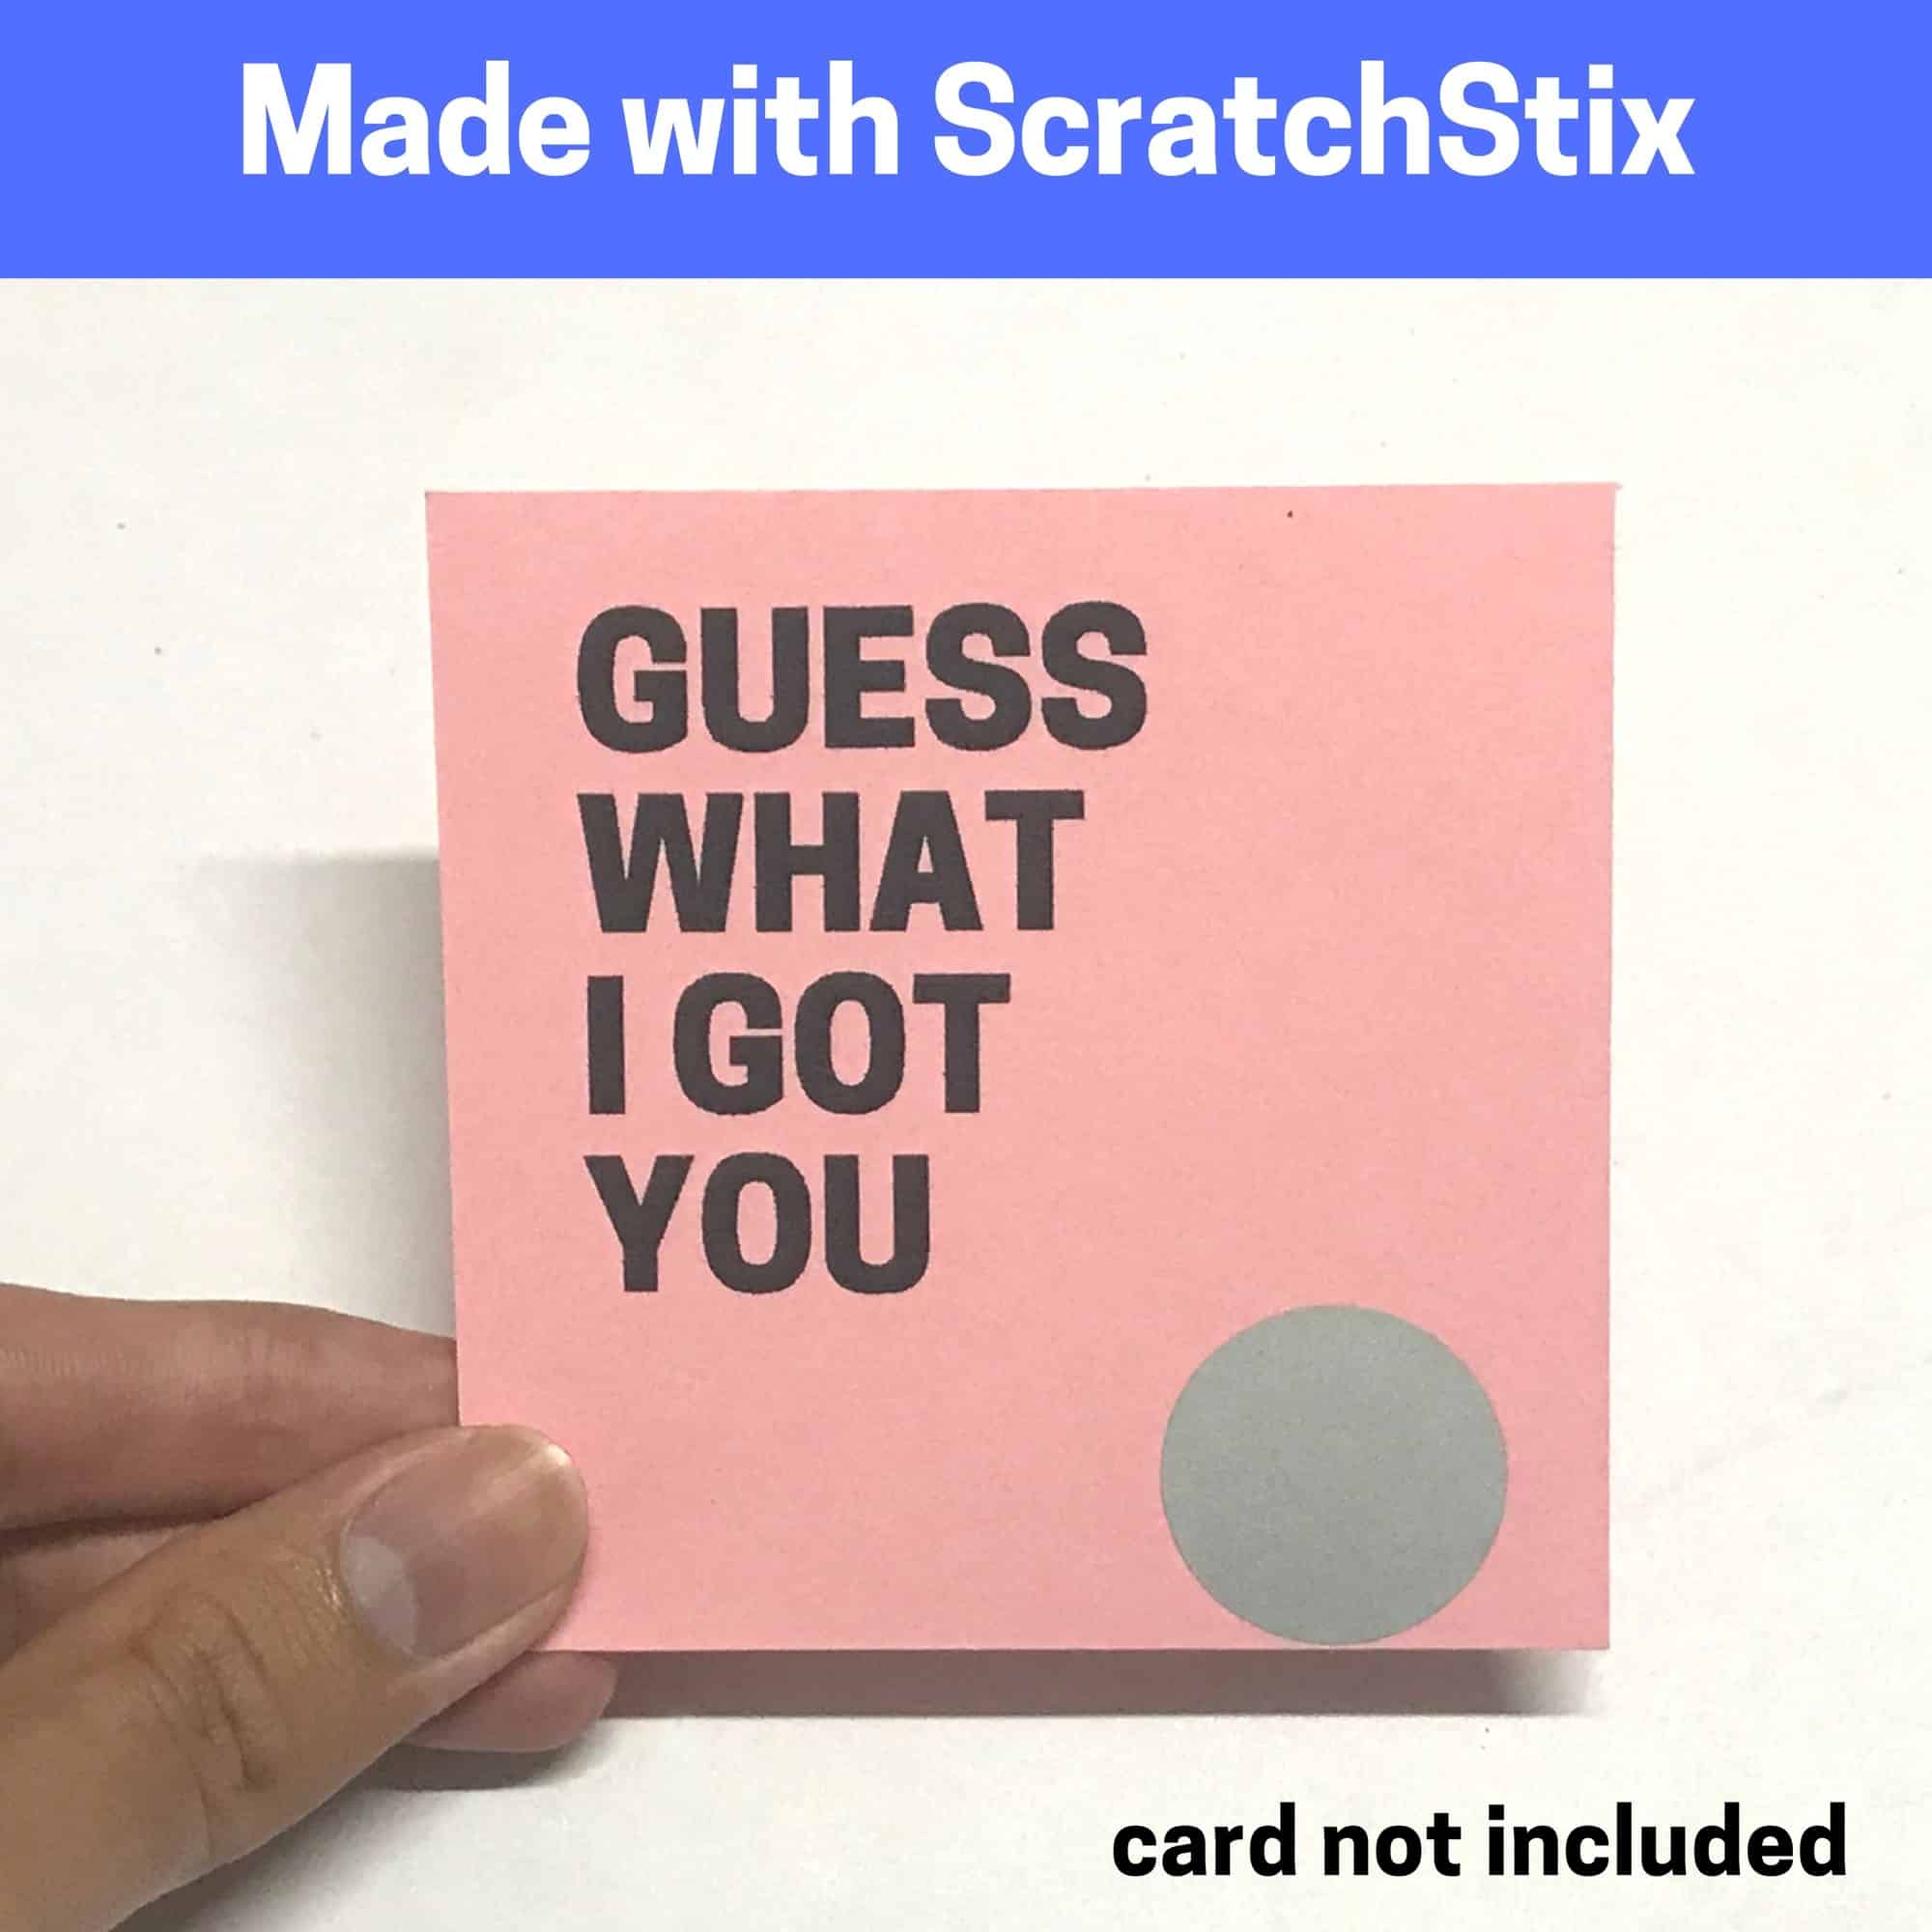 Scratch-off sticker holographic - shards 25mm circle